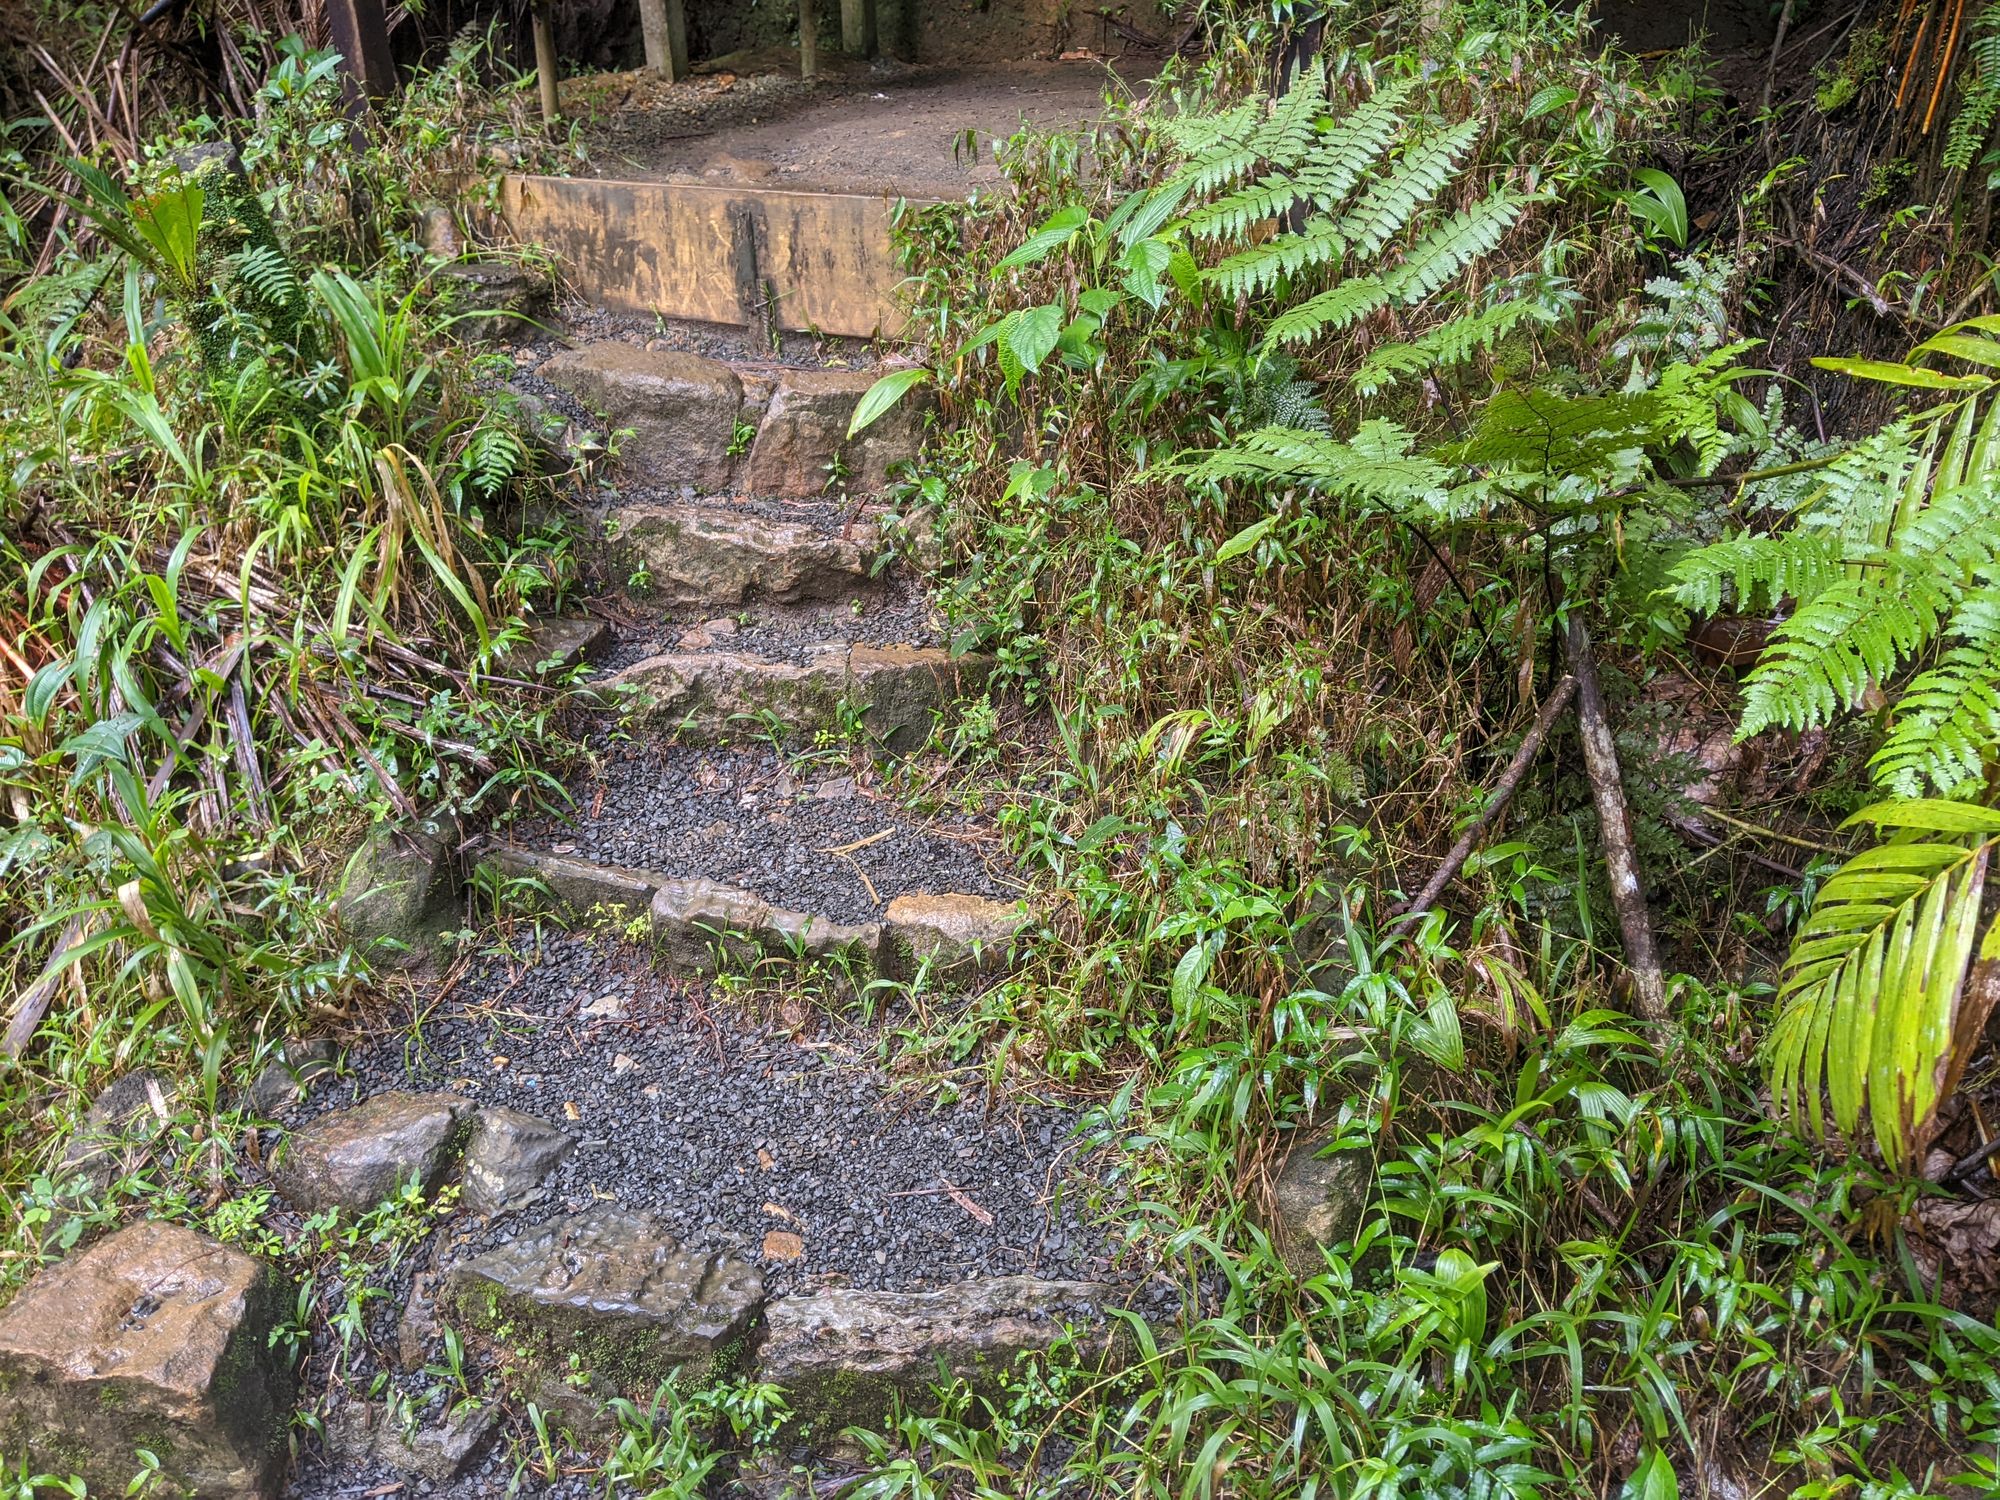 Pretty overgrown steps made with gravel - garden inspiration.